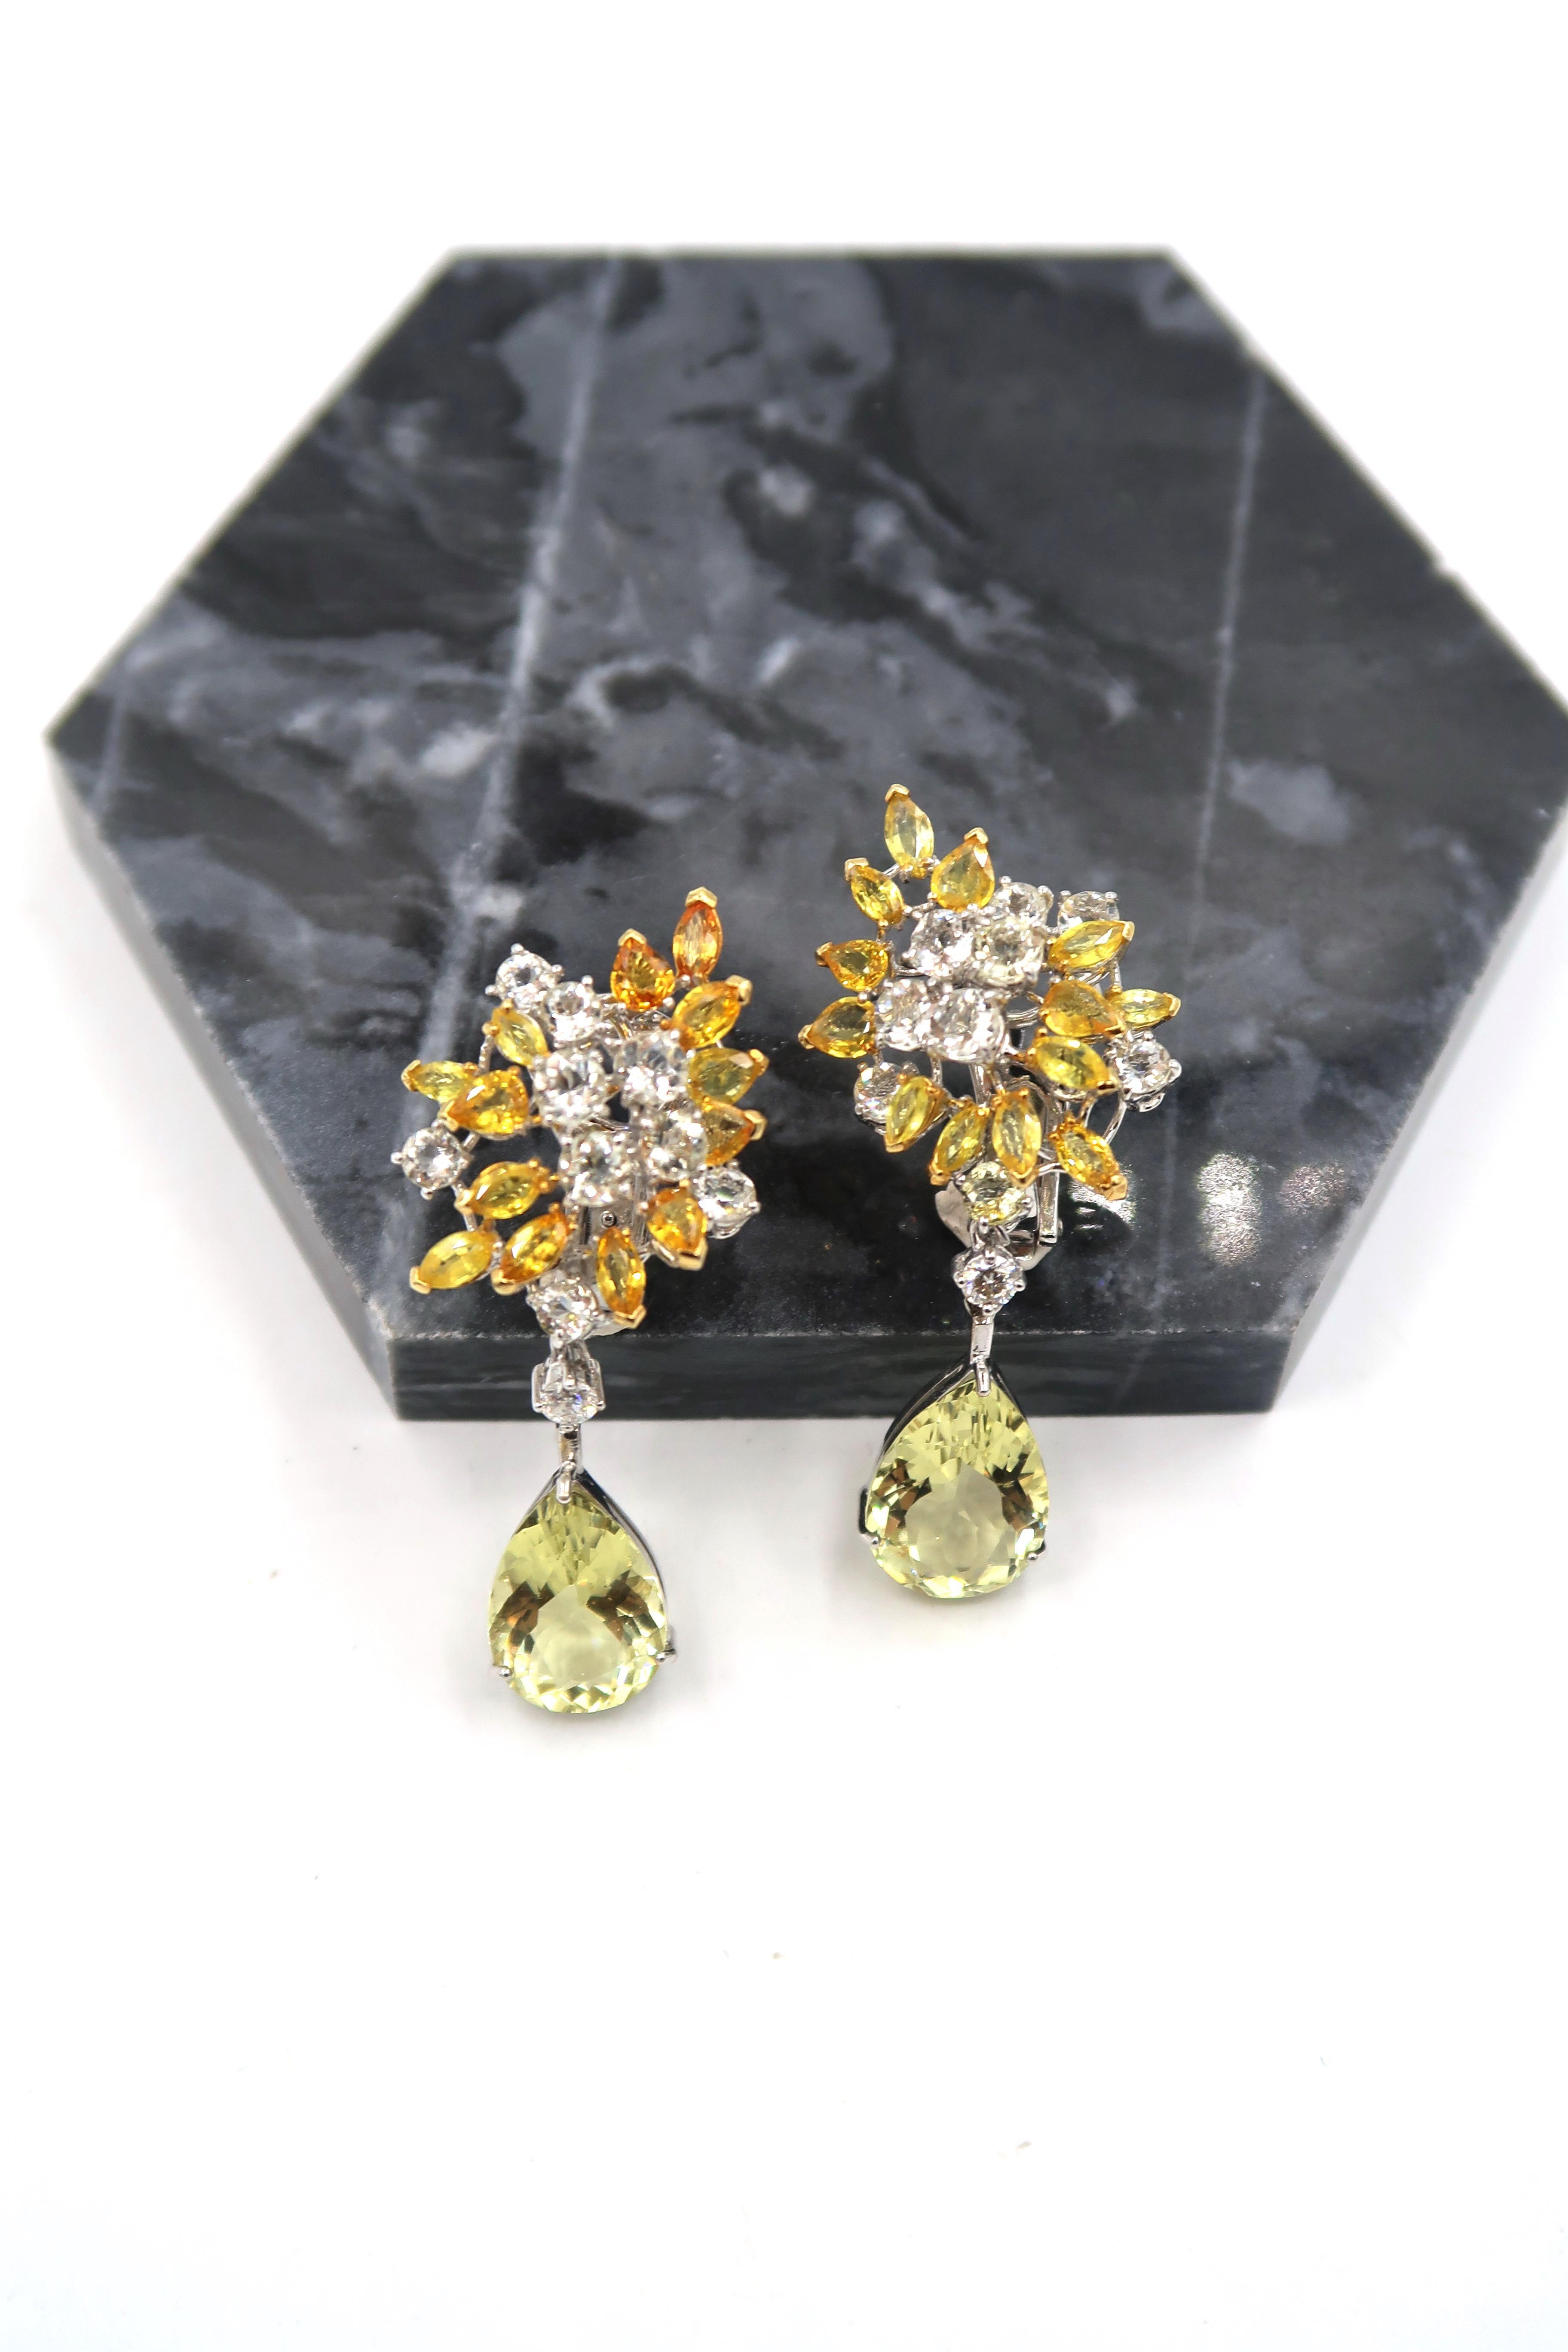 Yellow White Sapphire Diamond Cluster 18k Gold Earrings with Yellow Beryl Drops For Sale 4